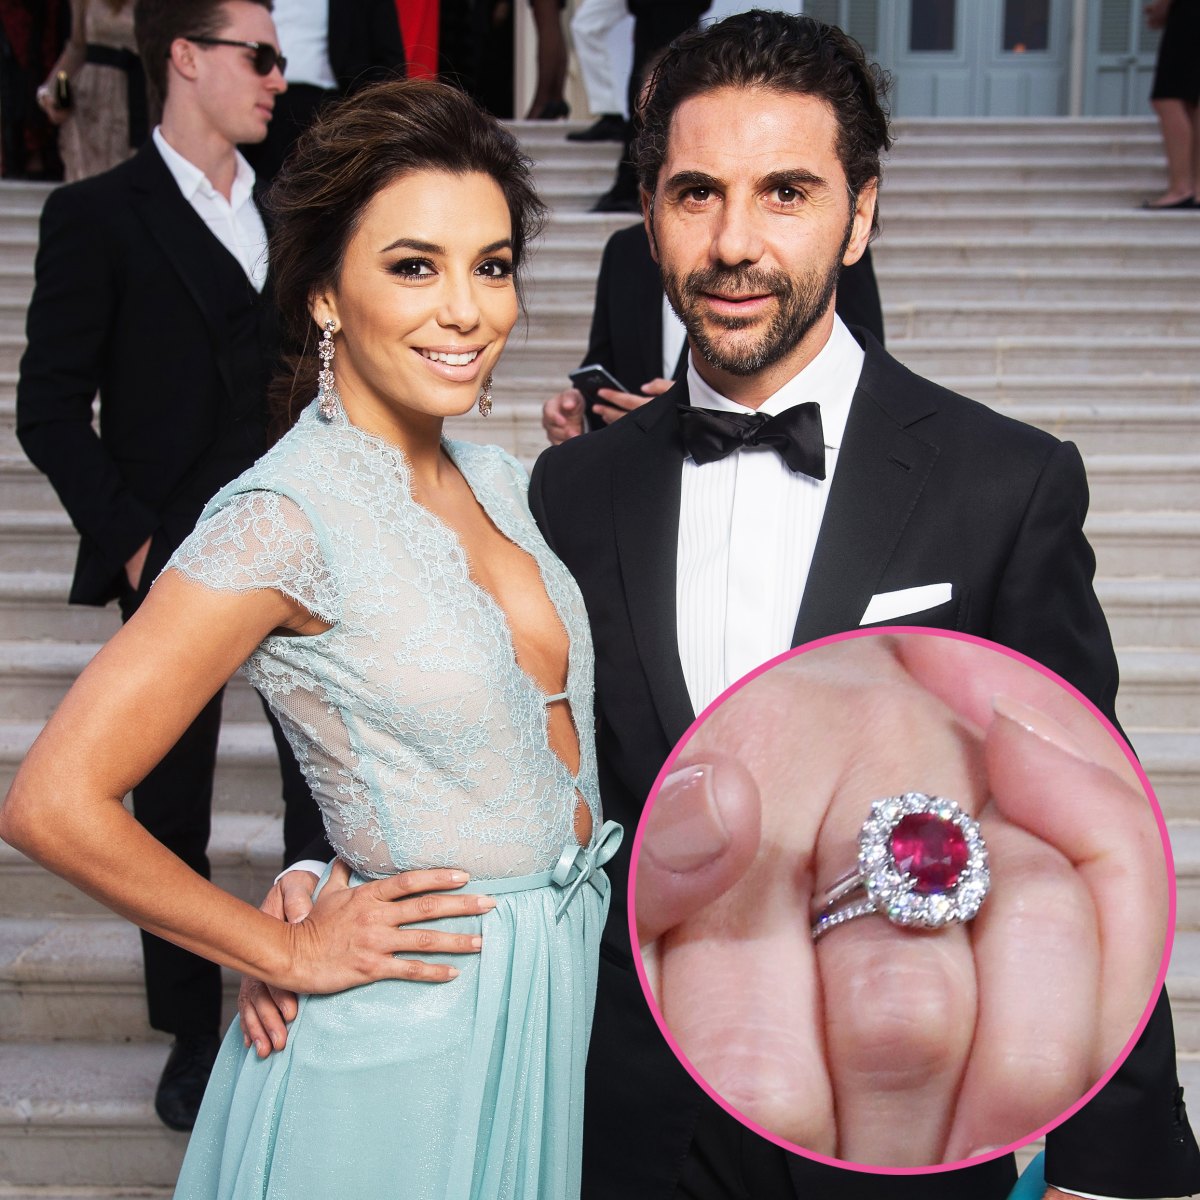 Dancing With the Stars' Pro Emma Slater Shows Off Her Stunning Engagement  Ring on Instagram - Closer Weekly